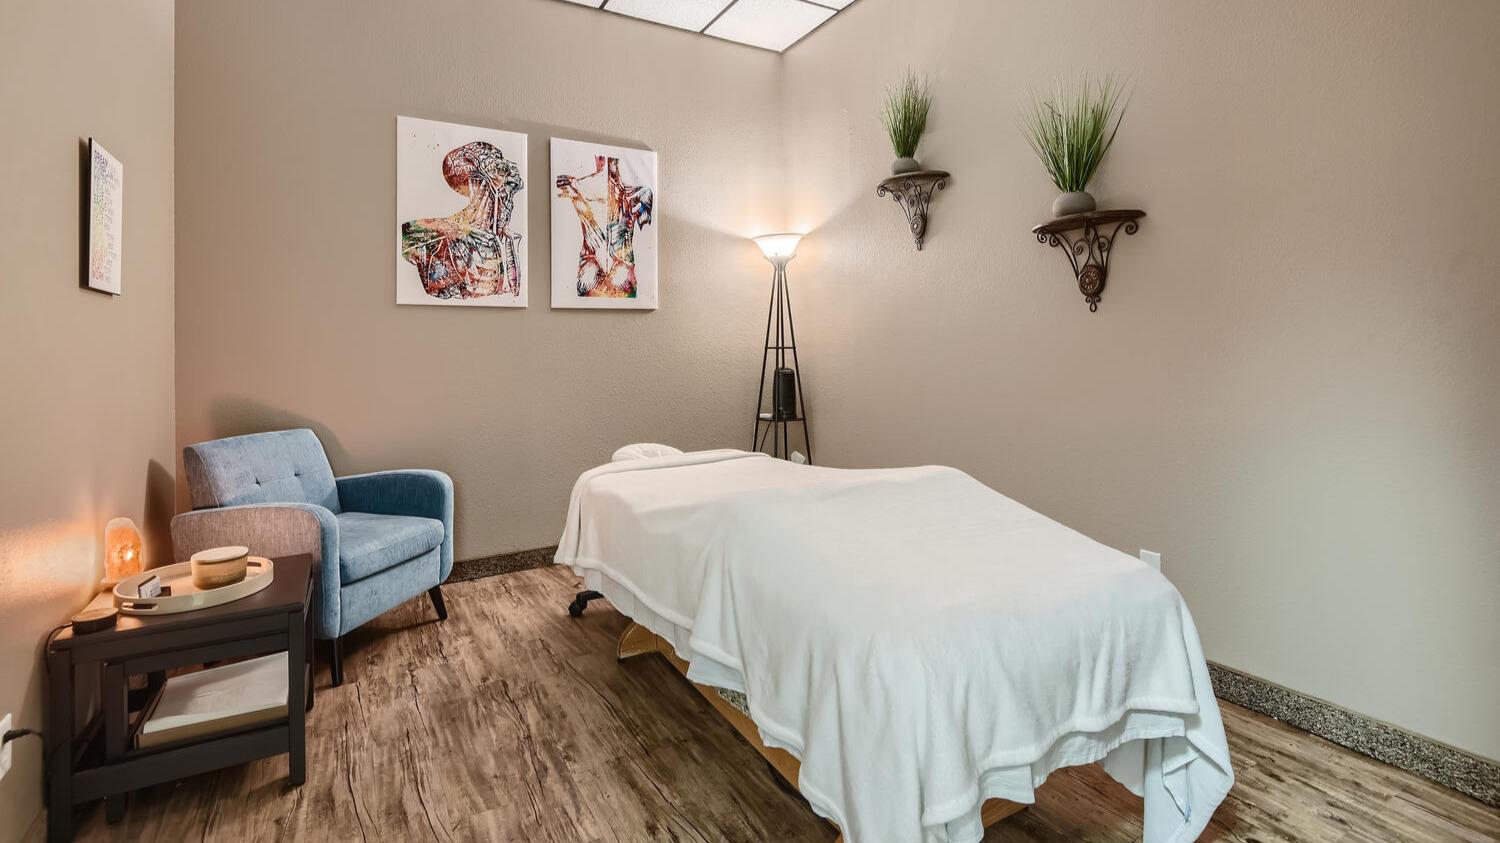 People turn to massage therapy to relieve stress from daily life, injuries, chronic and acute conditions, and help maintain health and wellness.